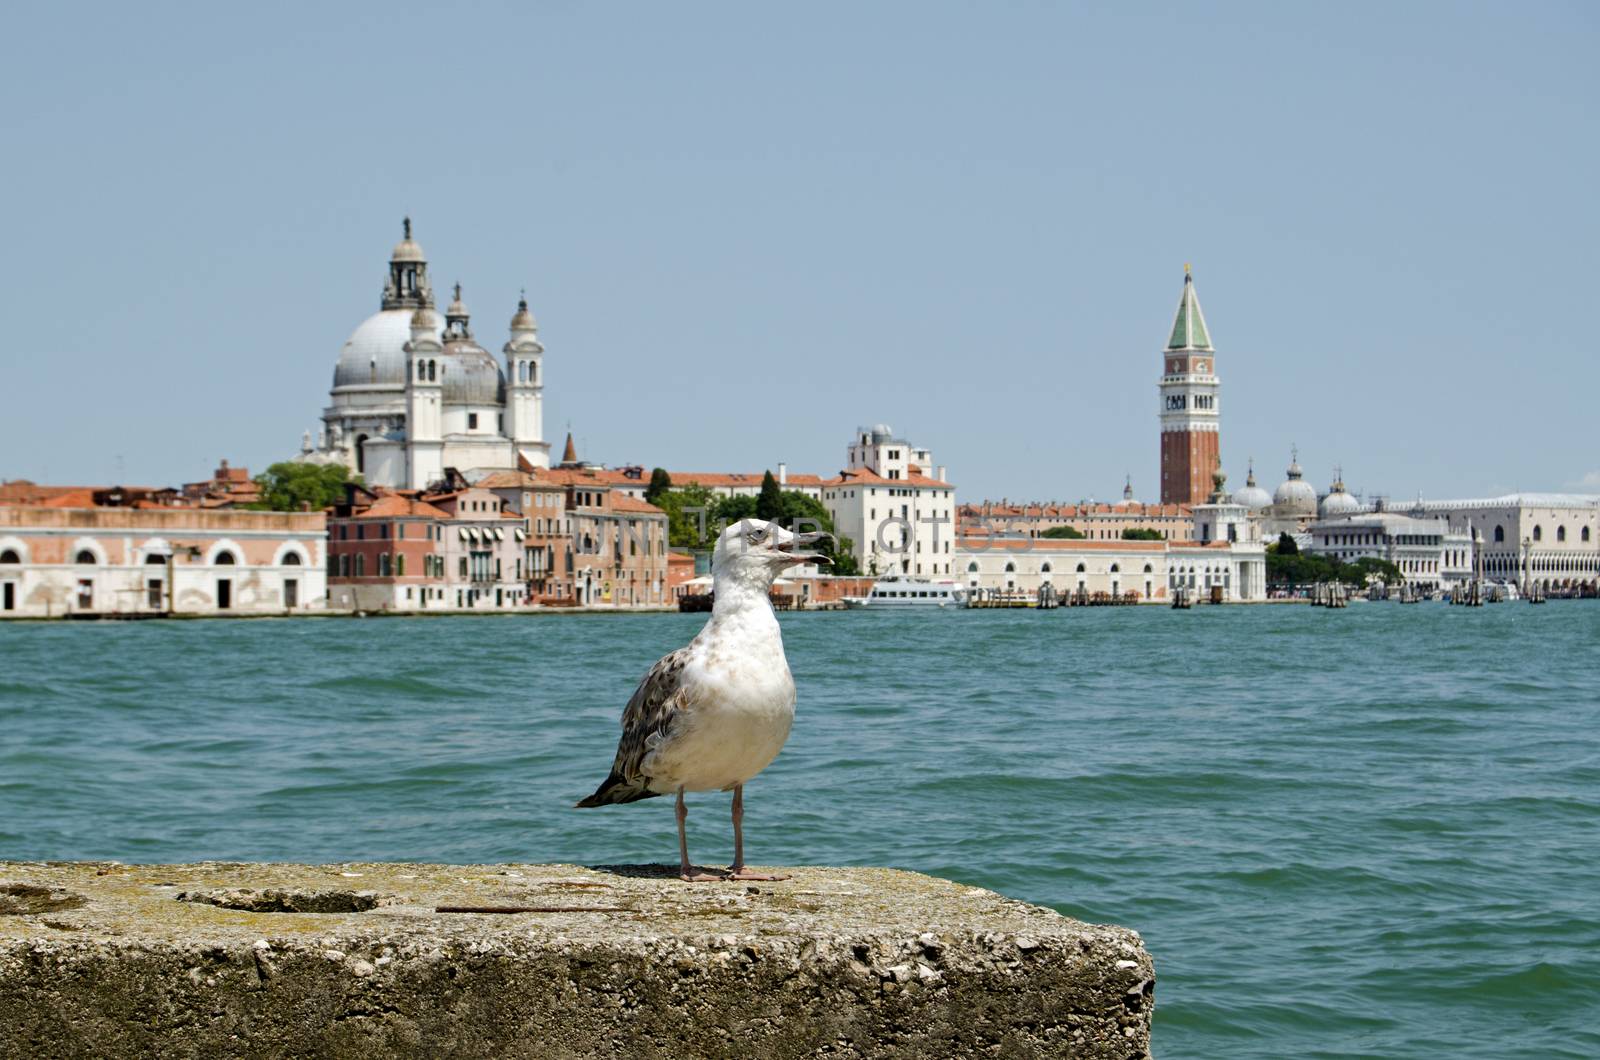 A young herring gull, latin name Larus argentatus gasping in awe at the magnificent view across the Giudecca Canal towards Santa Maria della Salute church and St Mark's Square on a sunny, summer day in Venice, Italy.